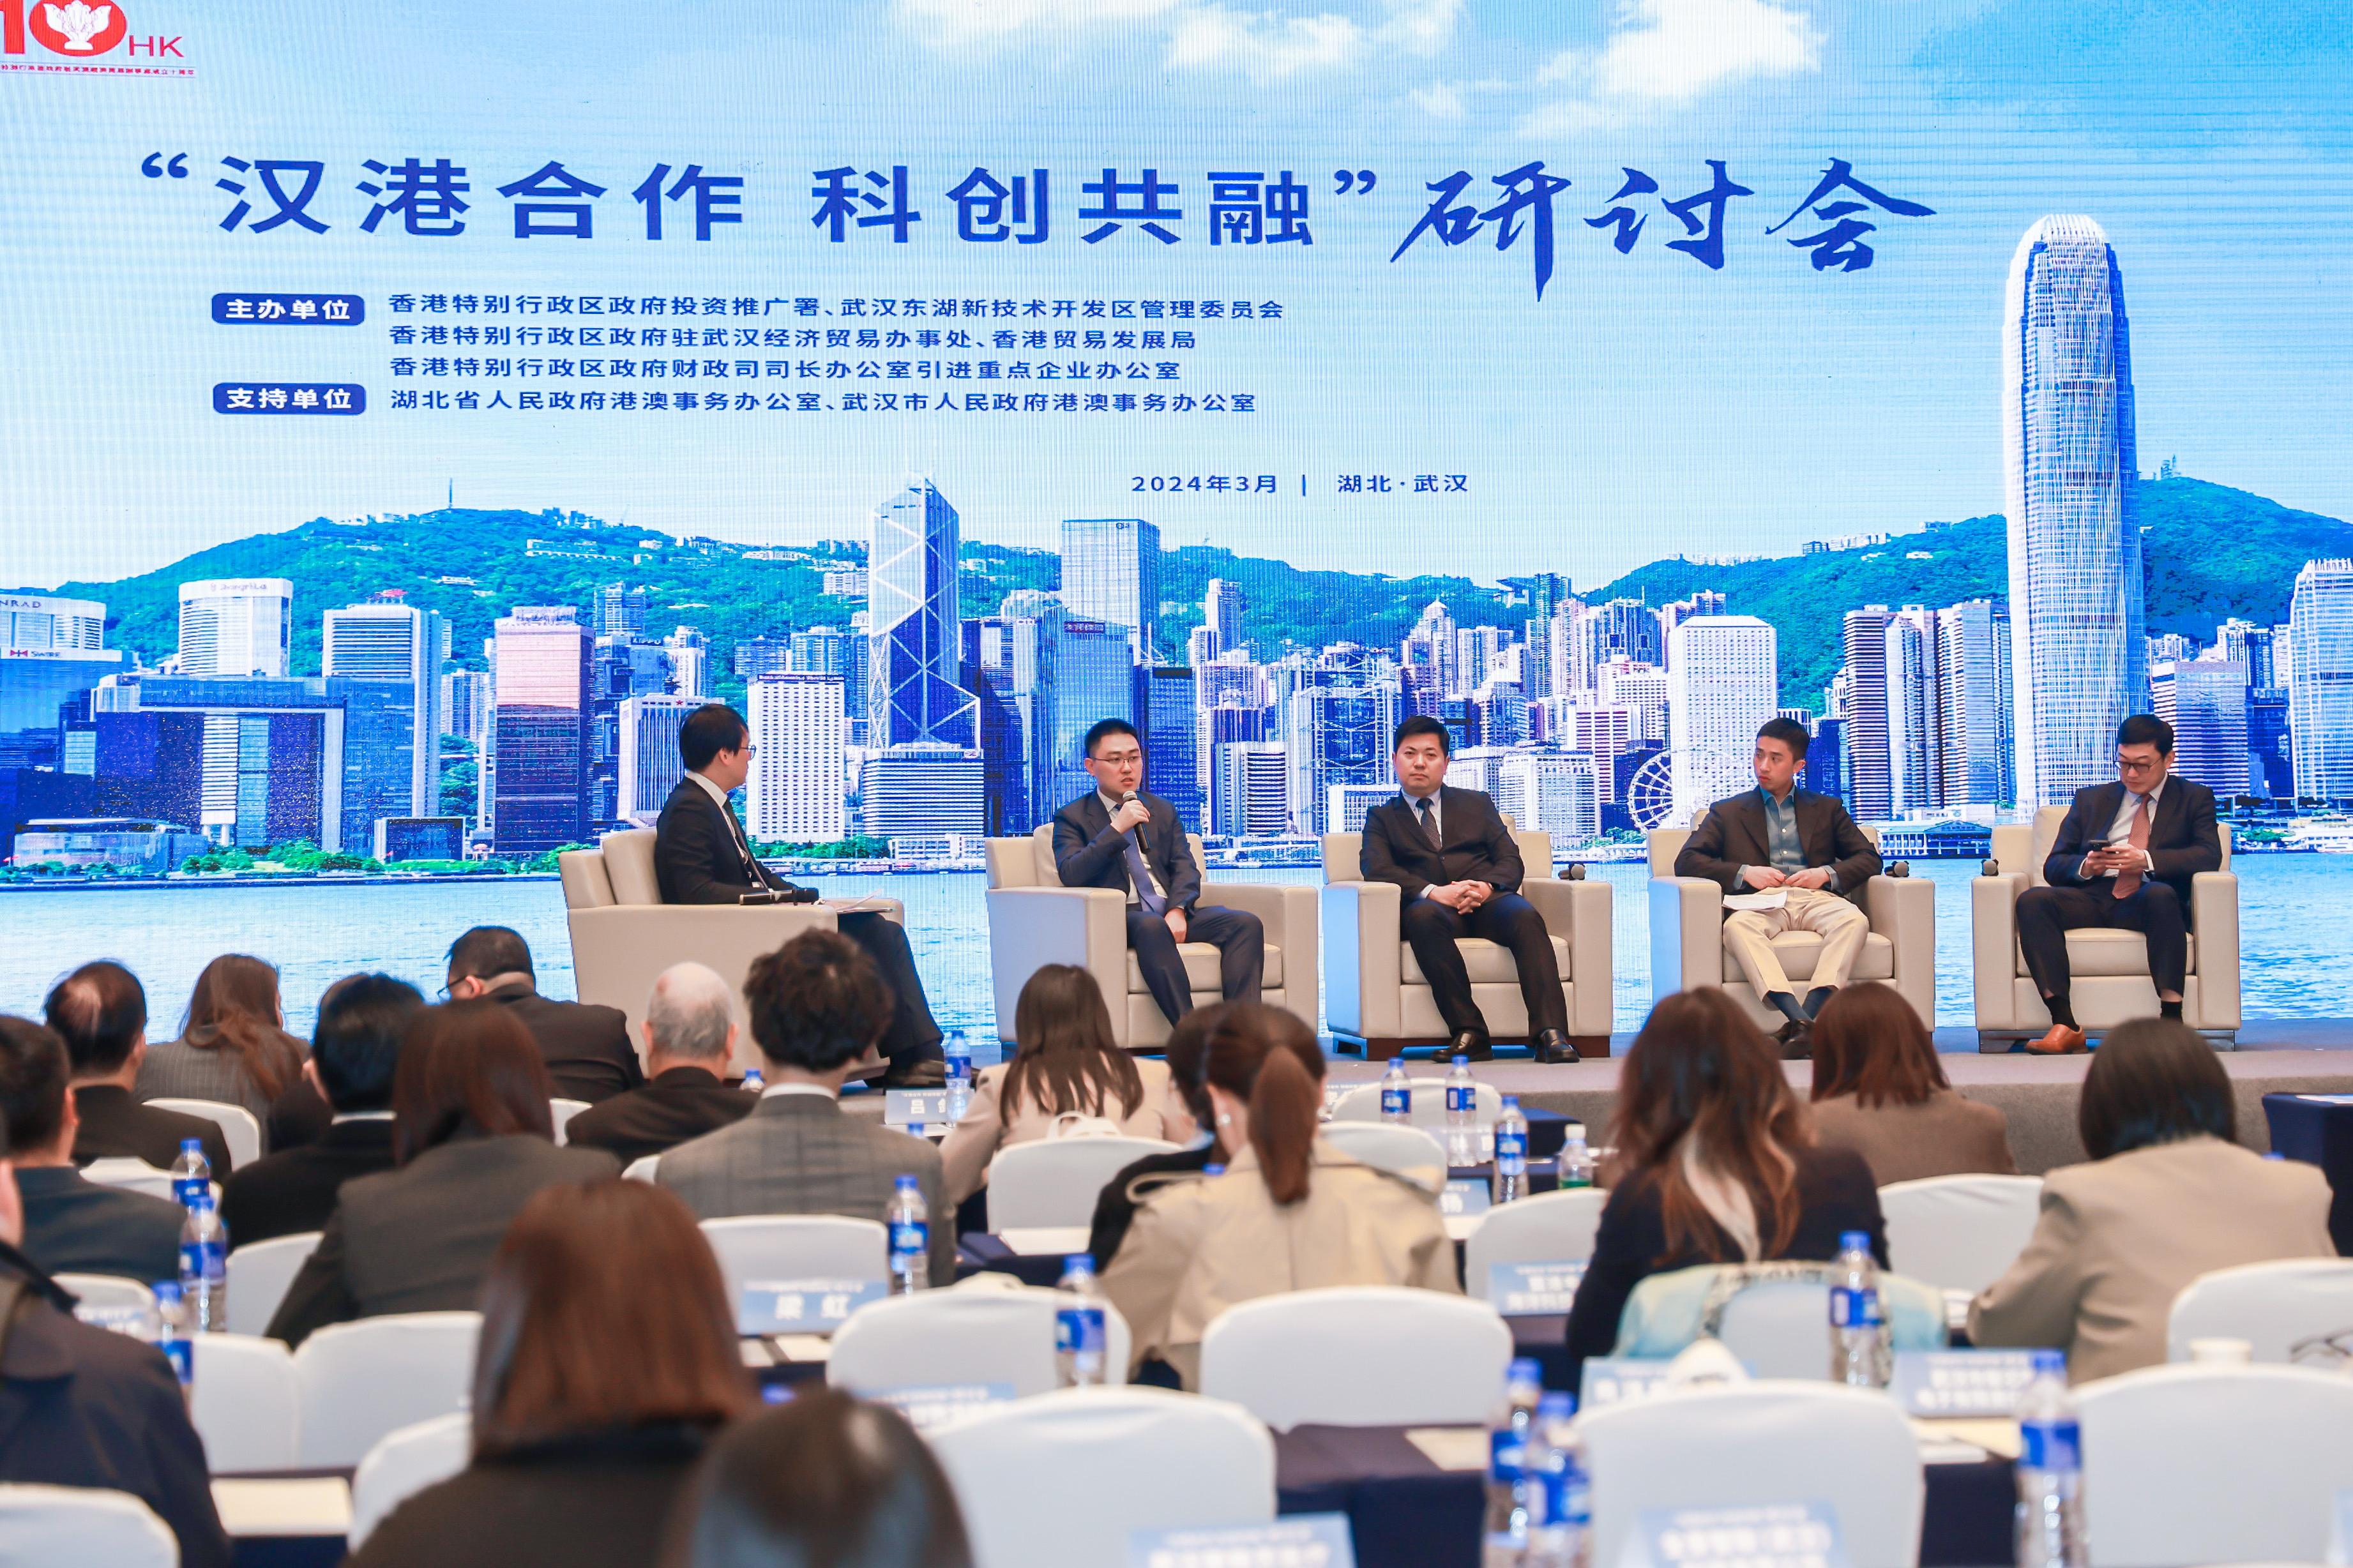 Invest Hong Kong and the Administrative Committee of Wuhan East Lake High-Tech Development Zone co-hosted a seminar in Wuhan, Hubei Province, today (March 21), encouraging local high-tech enterprises to make full use of Hong Kong's business advantages and opportunities in innovation development amid the Belt and Road Initiative and the Guangdong-Hong Kong-Macao Greater Bay Area development to expand overseas. Photo shows the panel discussion on the new co-operation opportunities between Wuhan and Hong Kong in innovation and technology development hosted by the Head of Business and Talent Attraction/Investment Promotion of the Hong Kong Economic and Trade Office in Wuhan, Mr Zhou Yikai (first left). 


